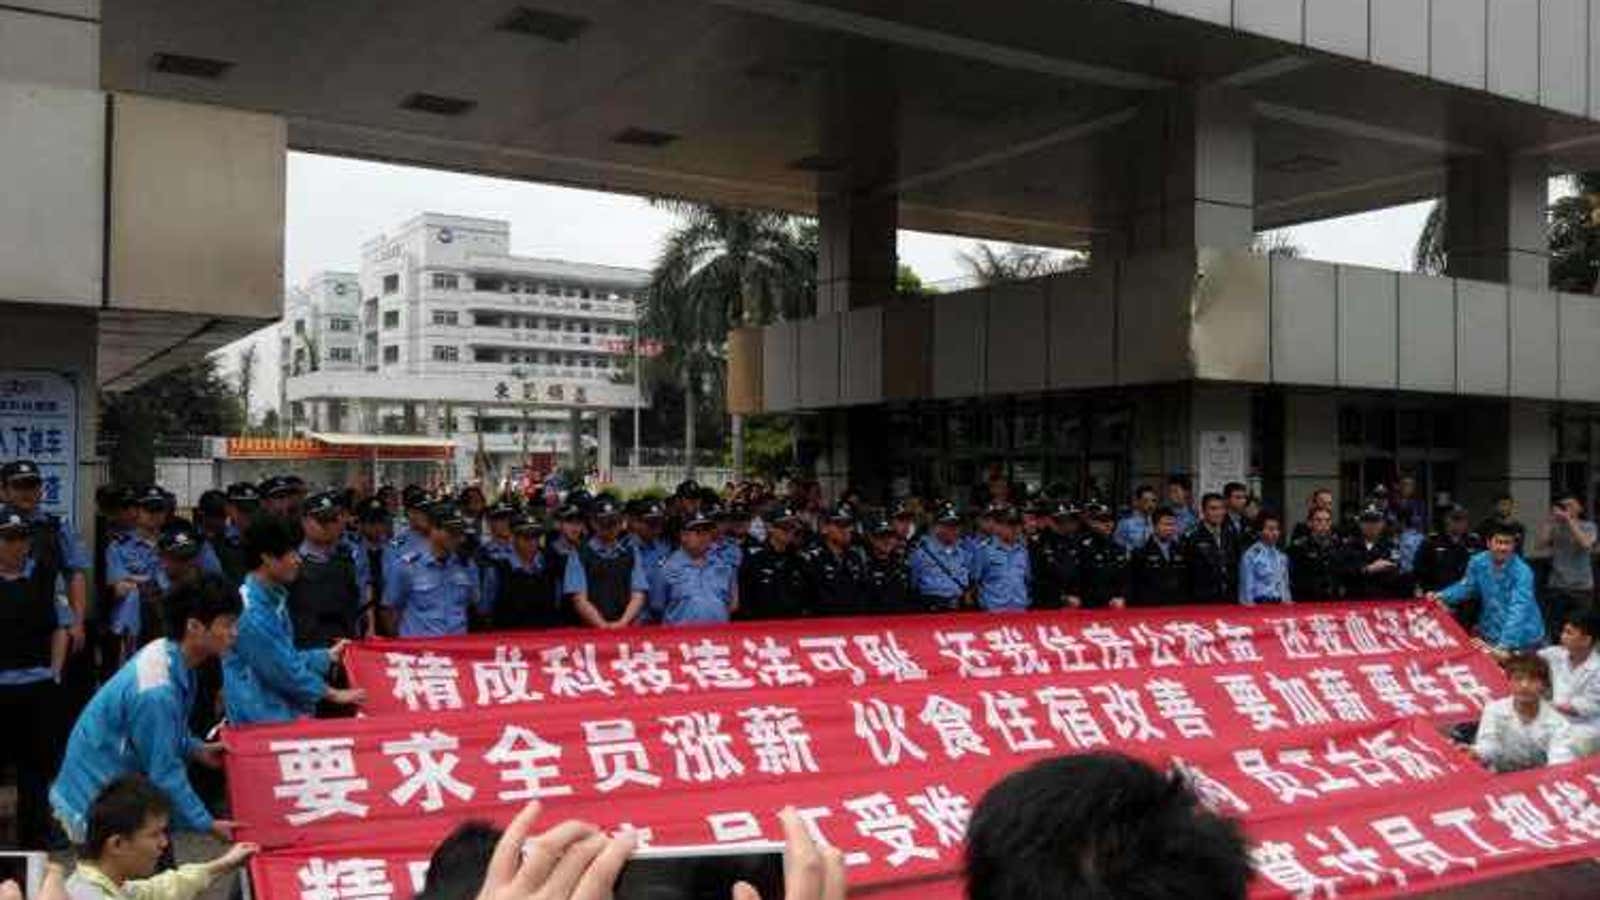 Workers at Yue Yuen, wearing the blue uniforms of the factory, on strike on March 20. “Yue Yuen is breaking the law,” their sign reads. “We are fighting for justice.”